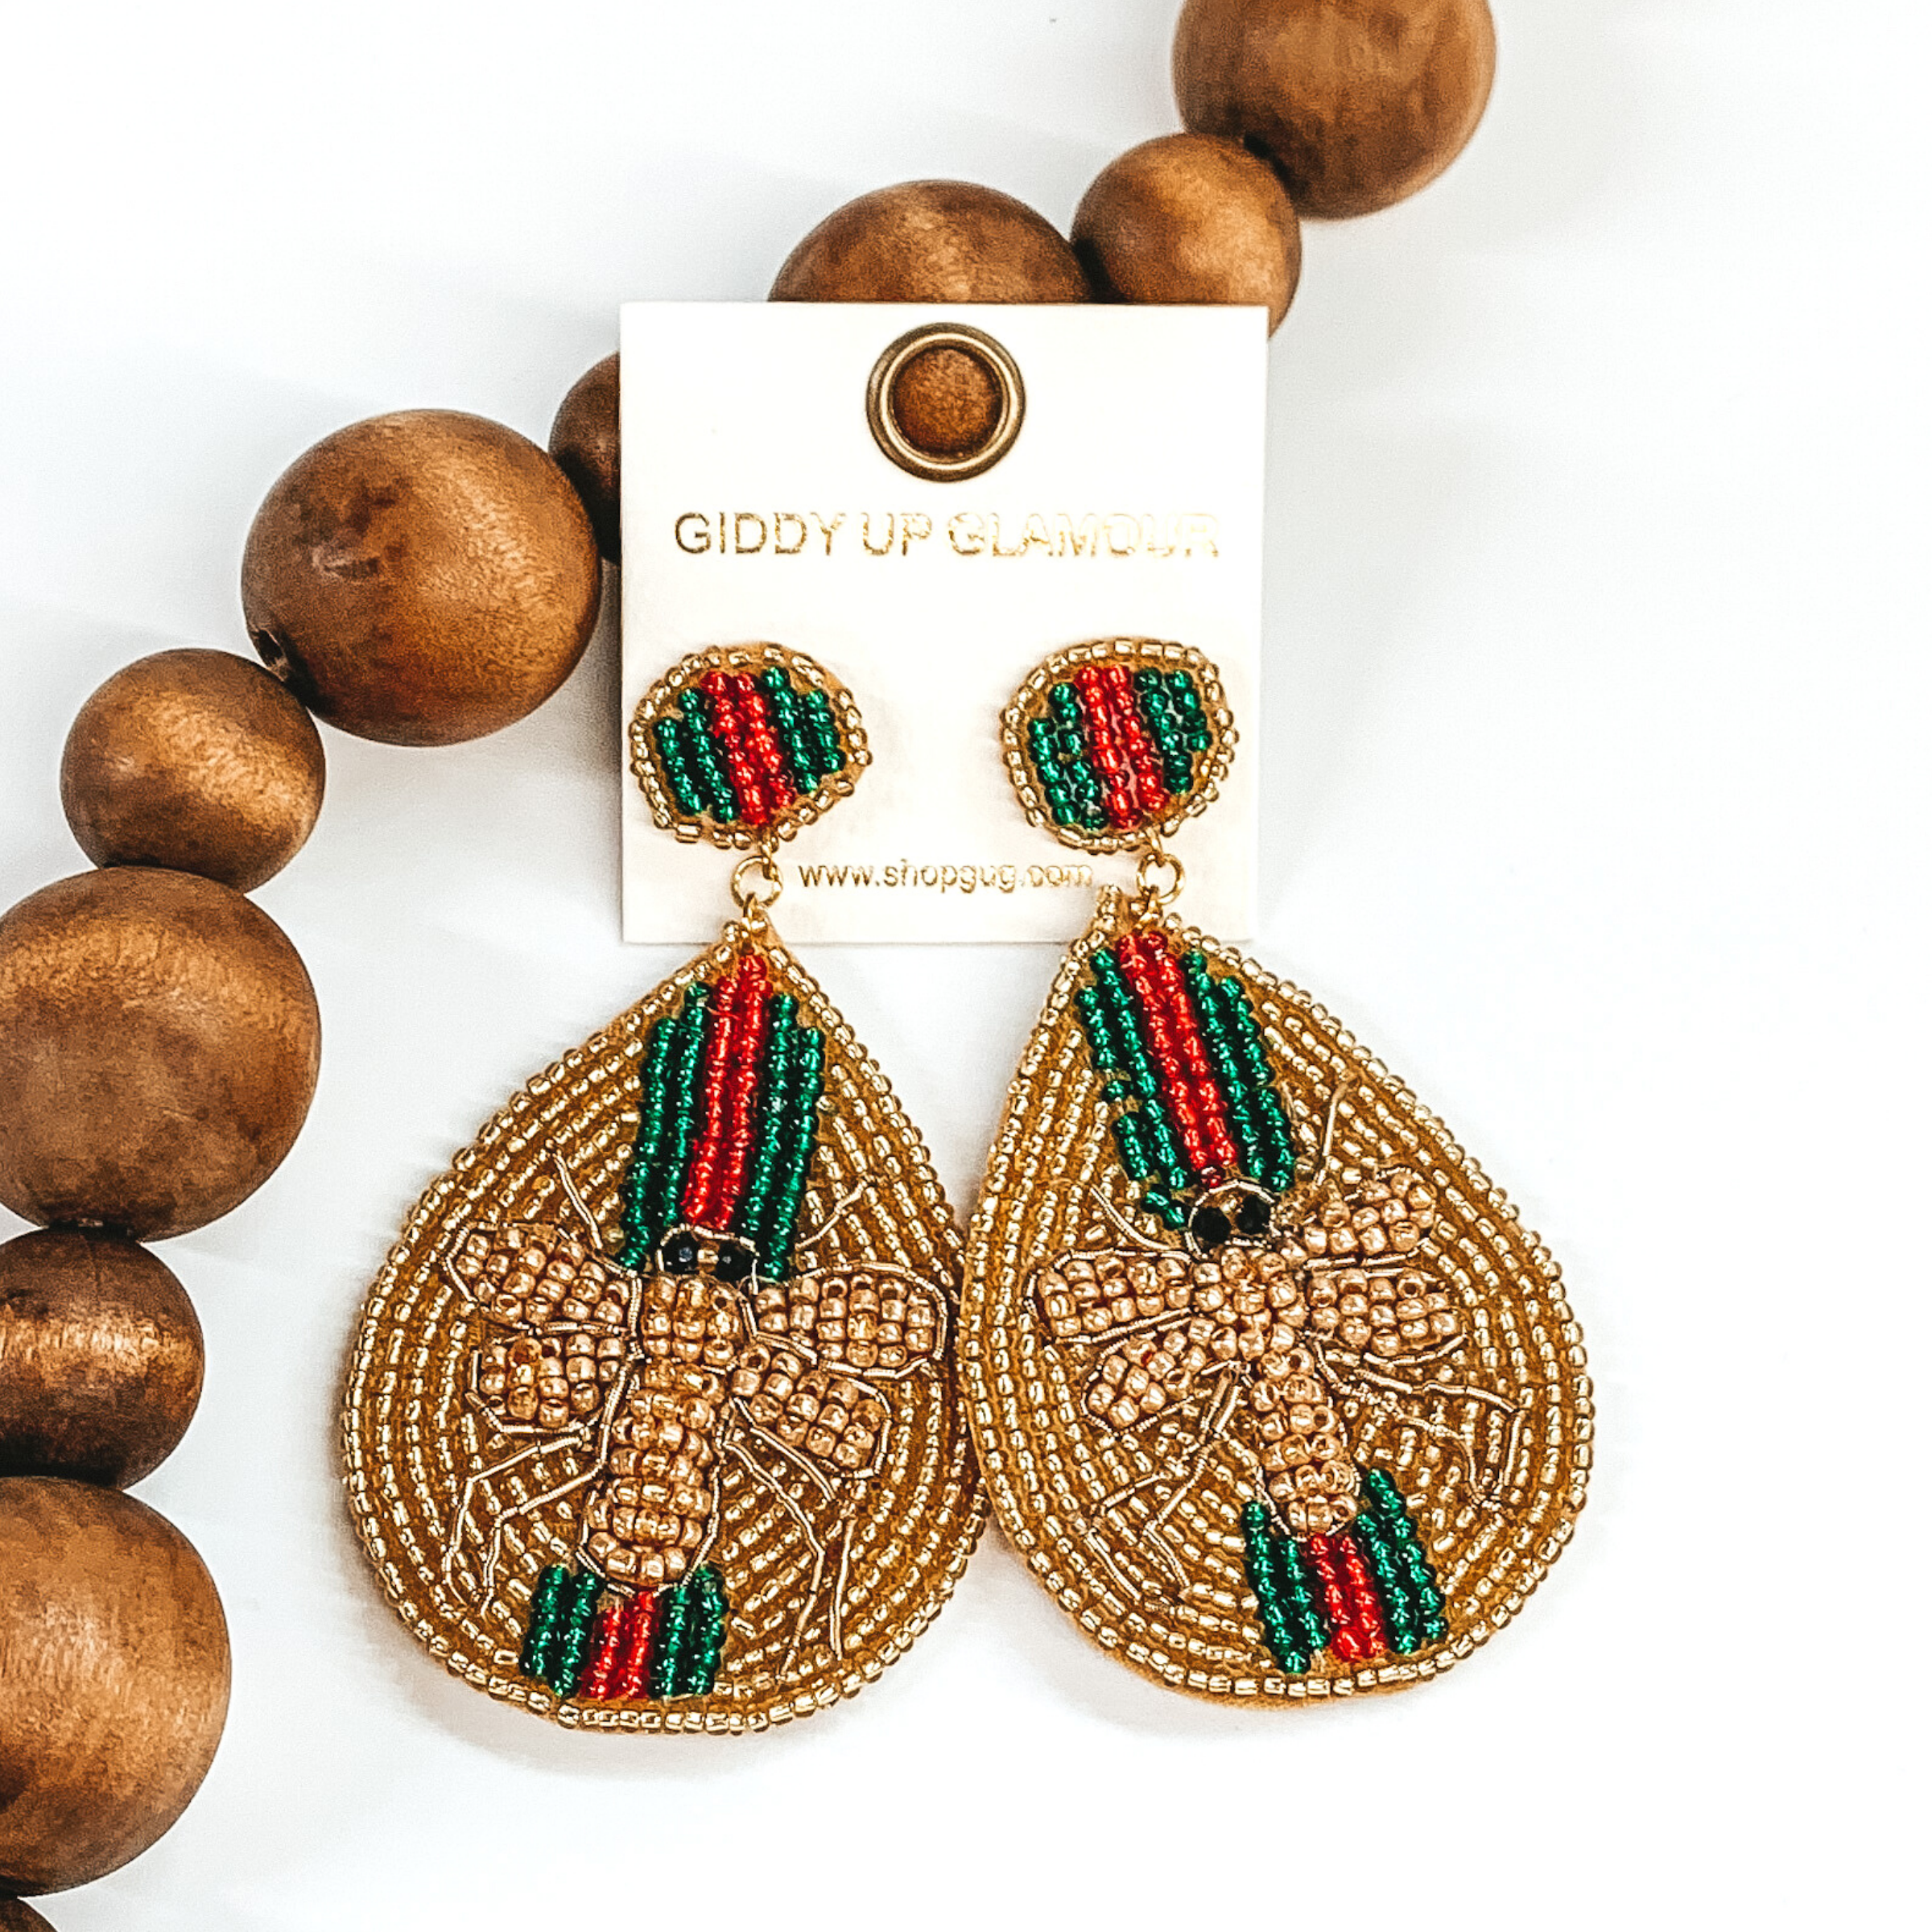 Circle beaded studs with a beaded teardrop dangle. The majority of the beads were gold with green and red stripes. The center of the teardrop was a gold beaded bee. These earrings are pictured on a white background with dark brown beads.